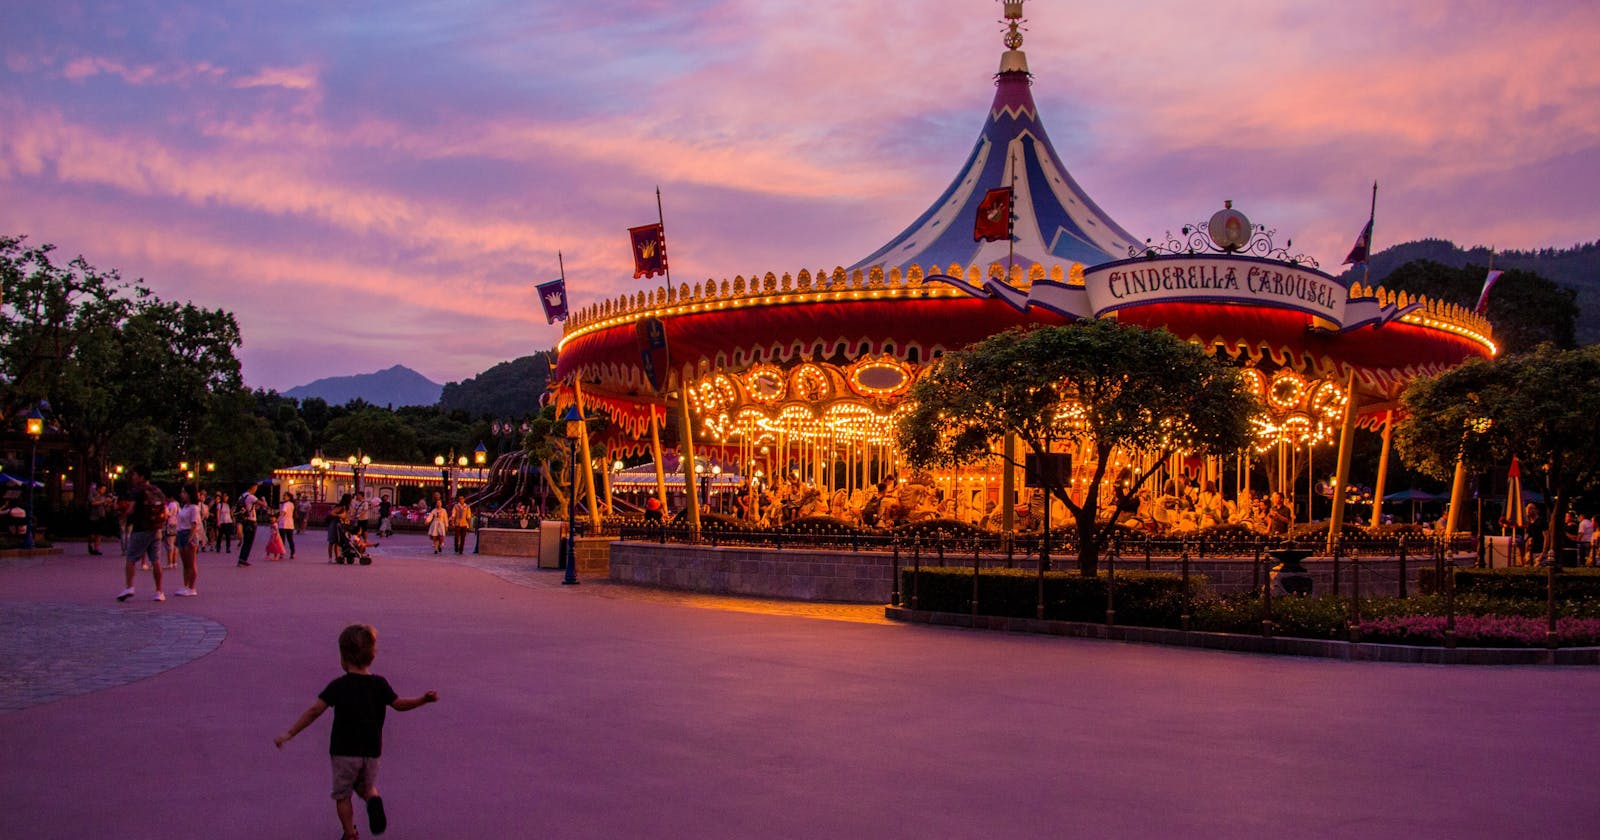 Carousel slider tutorial with HTML, CSS and JavaScript